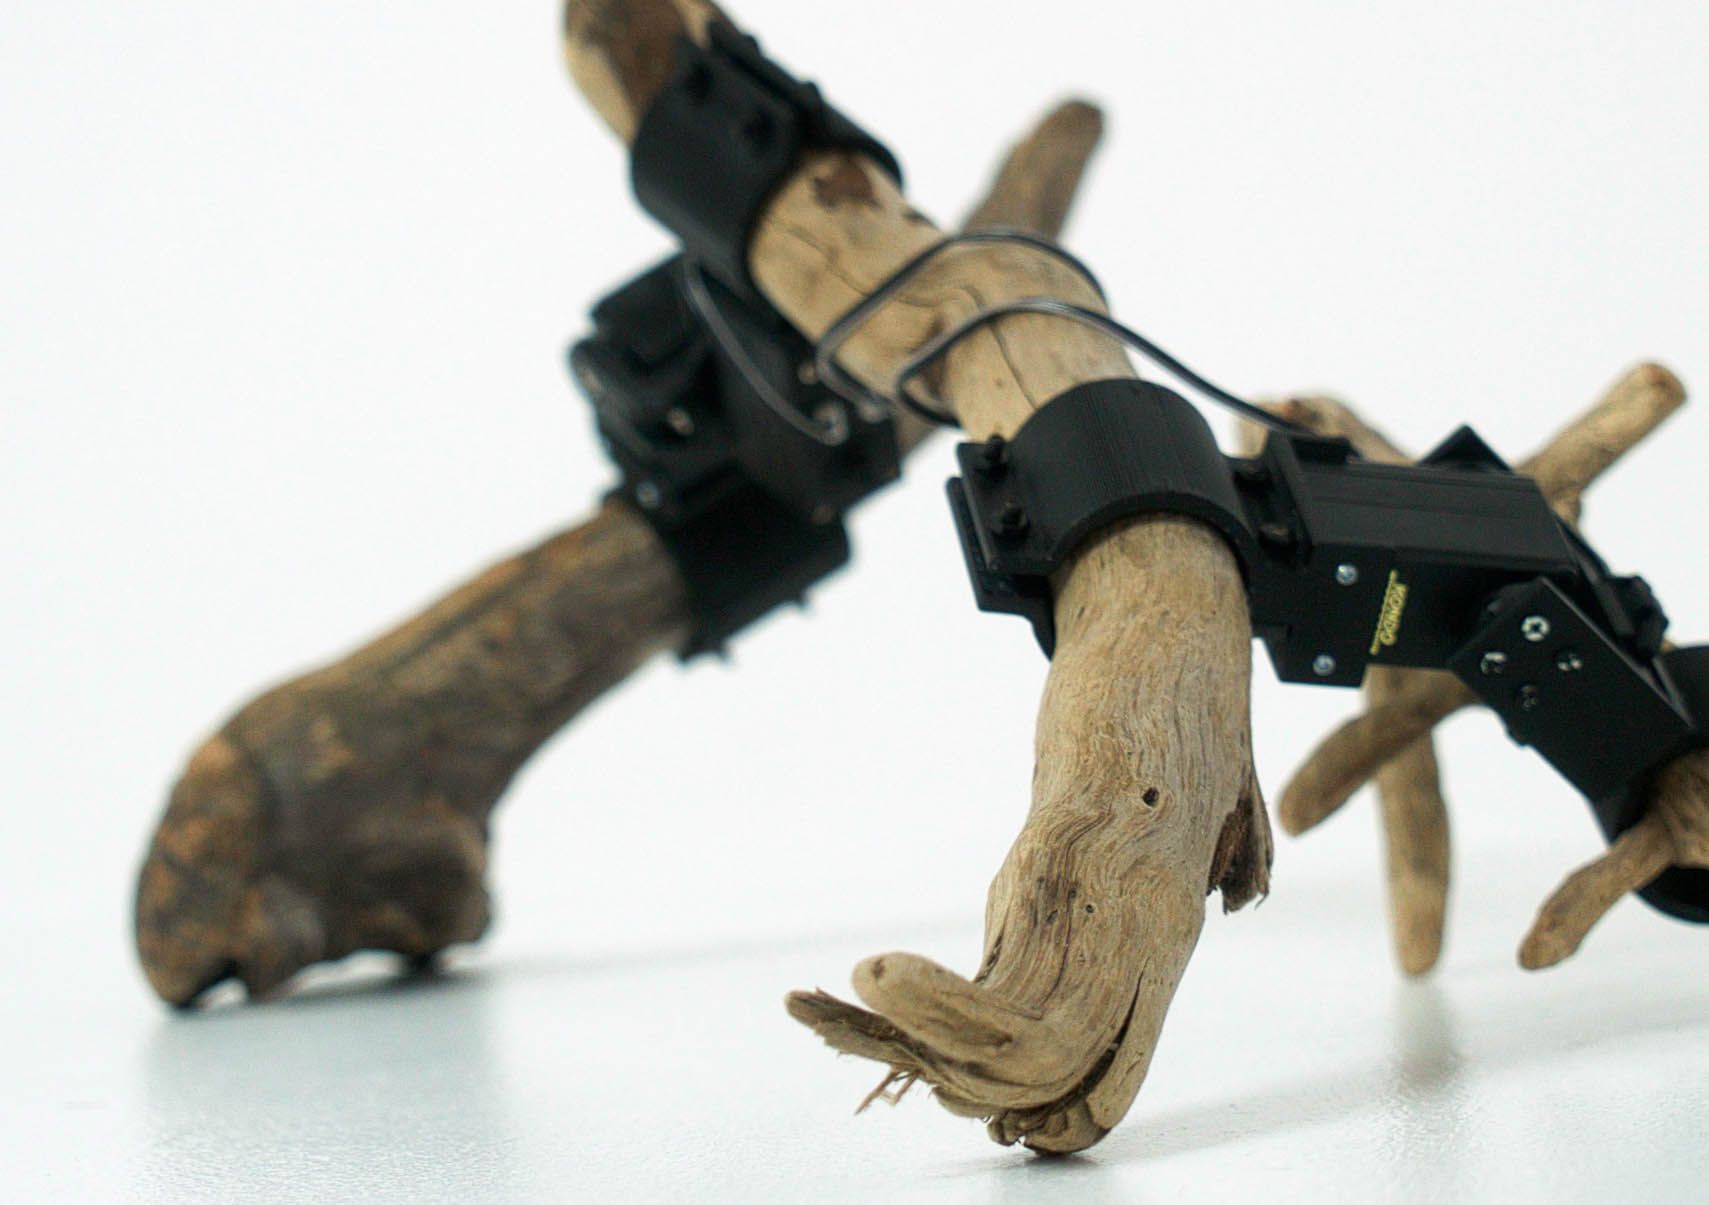 Robots Made Out of Branches Use Deep Learning to Walk